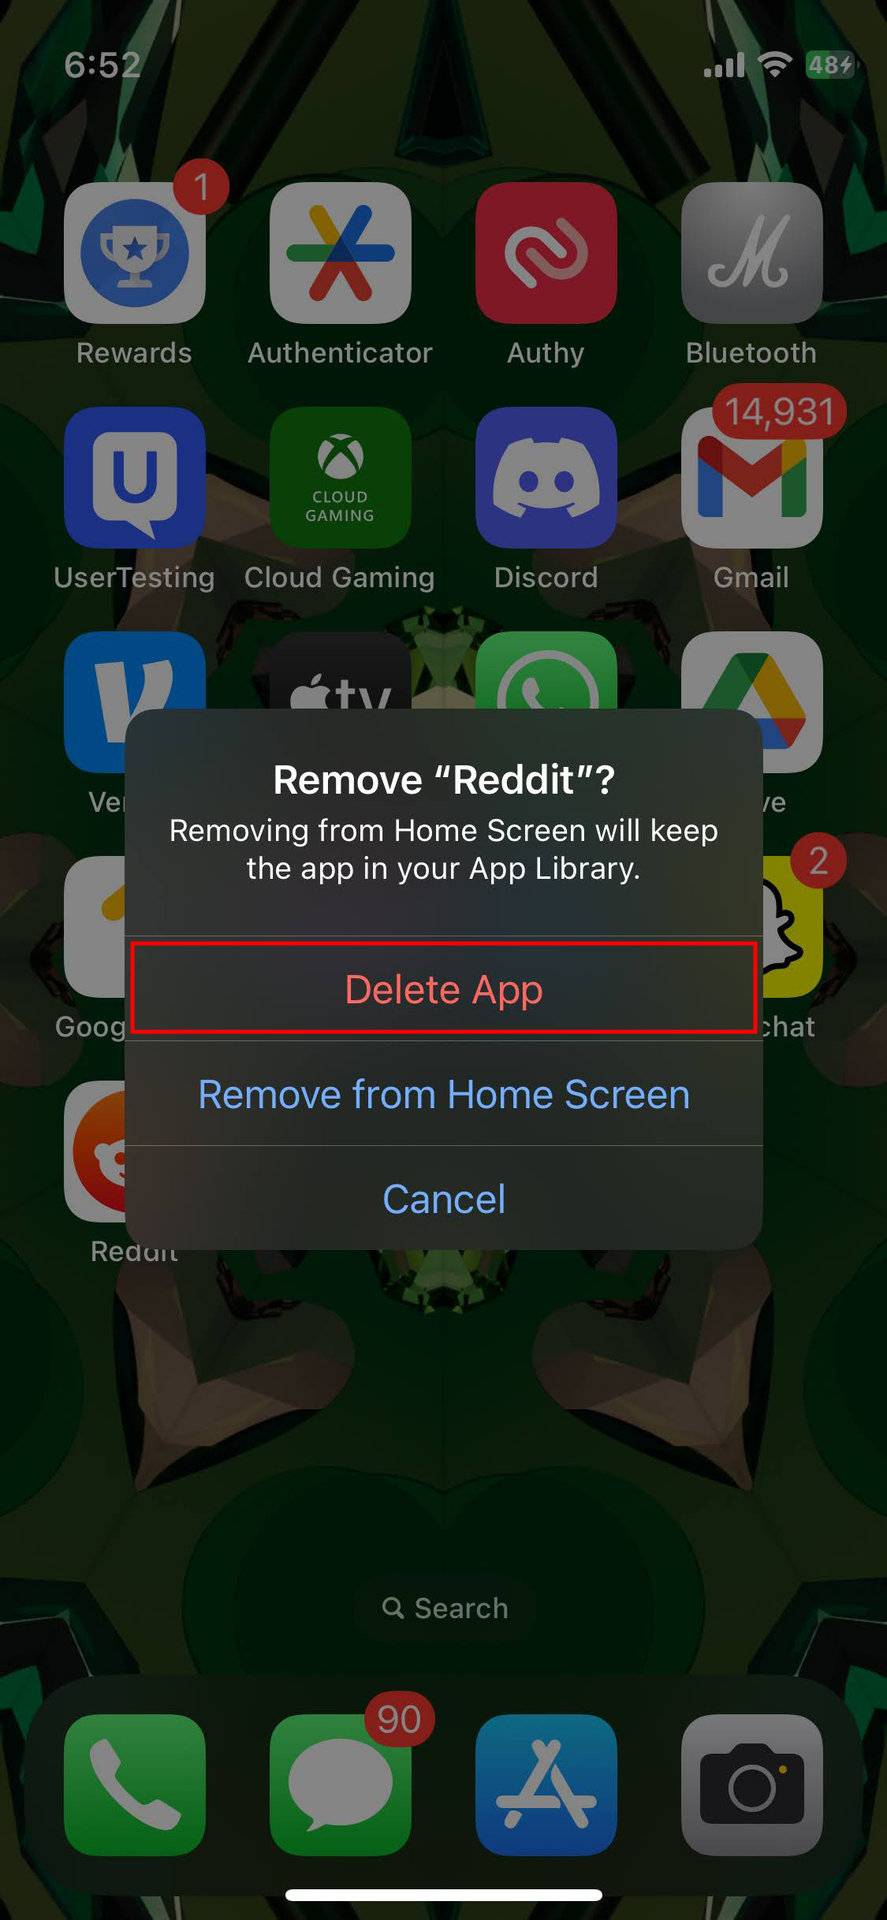 Yesterday For Old Reddit on the App Store